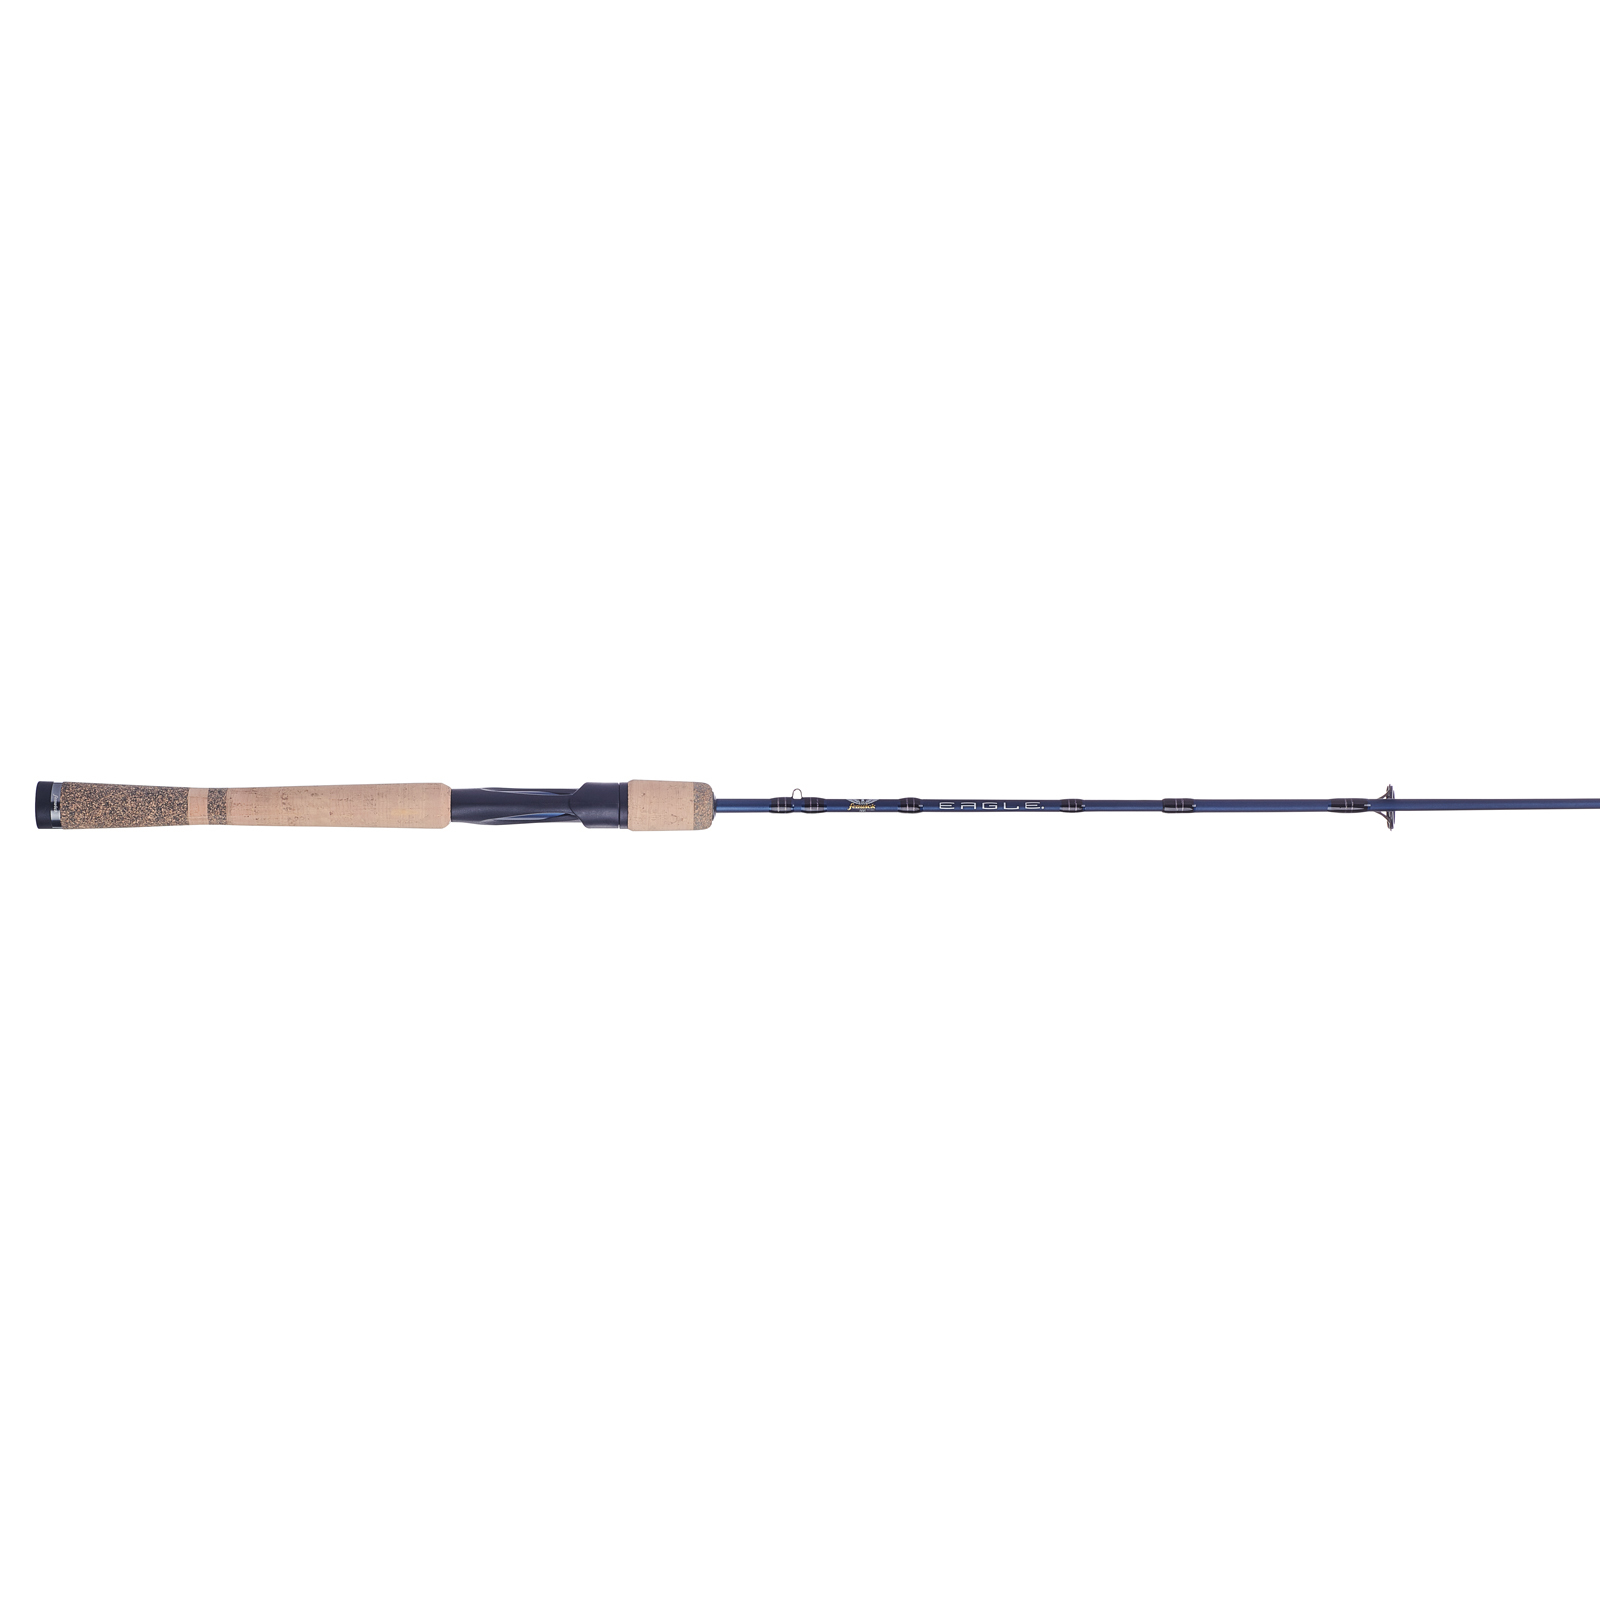 Fenwick Eagle Spinning Rod, Medium 3 Piece, Travel, Fast, Tapper 6-14lb, 24  Ton Graphite, Prem Cork, Tach Grip, SS Guide with Alum Oxite Insrts  EAG66M-FS-3 , $4.04 Off with Free S&H — CampSaver